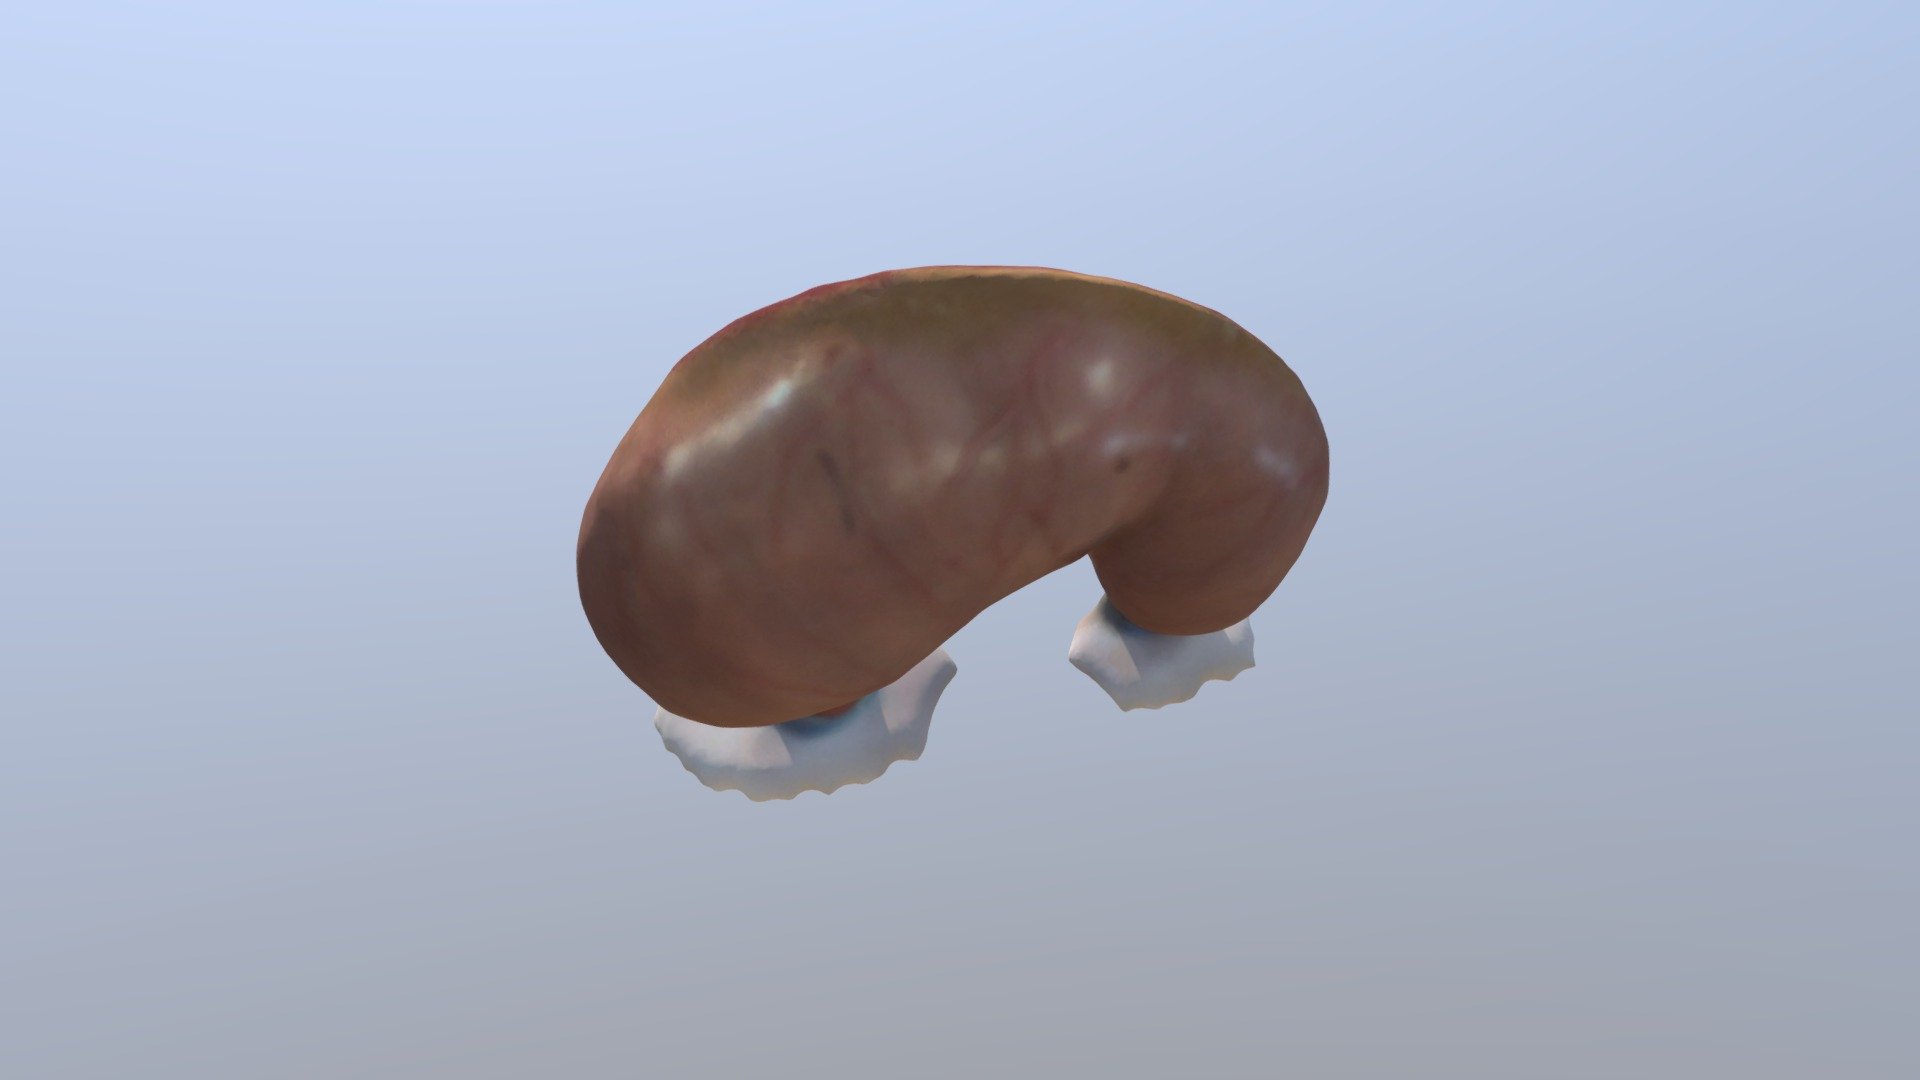 Anatomical model of the stomach